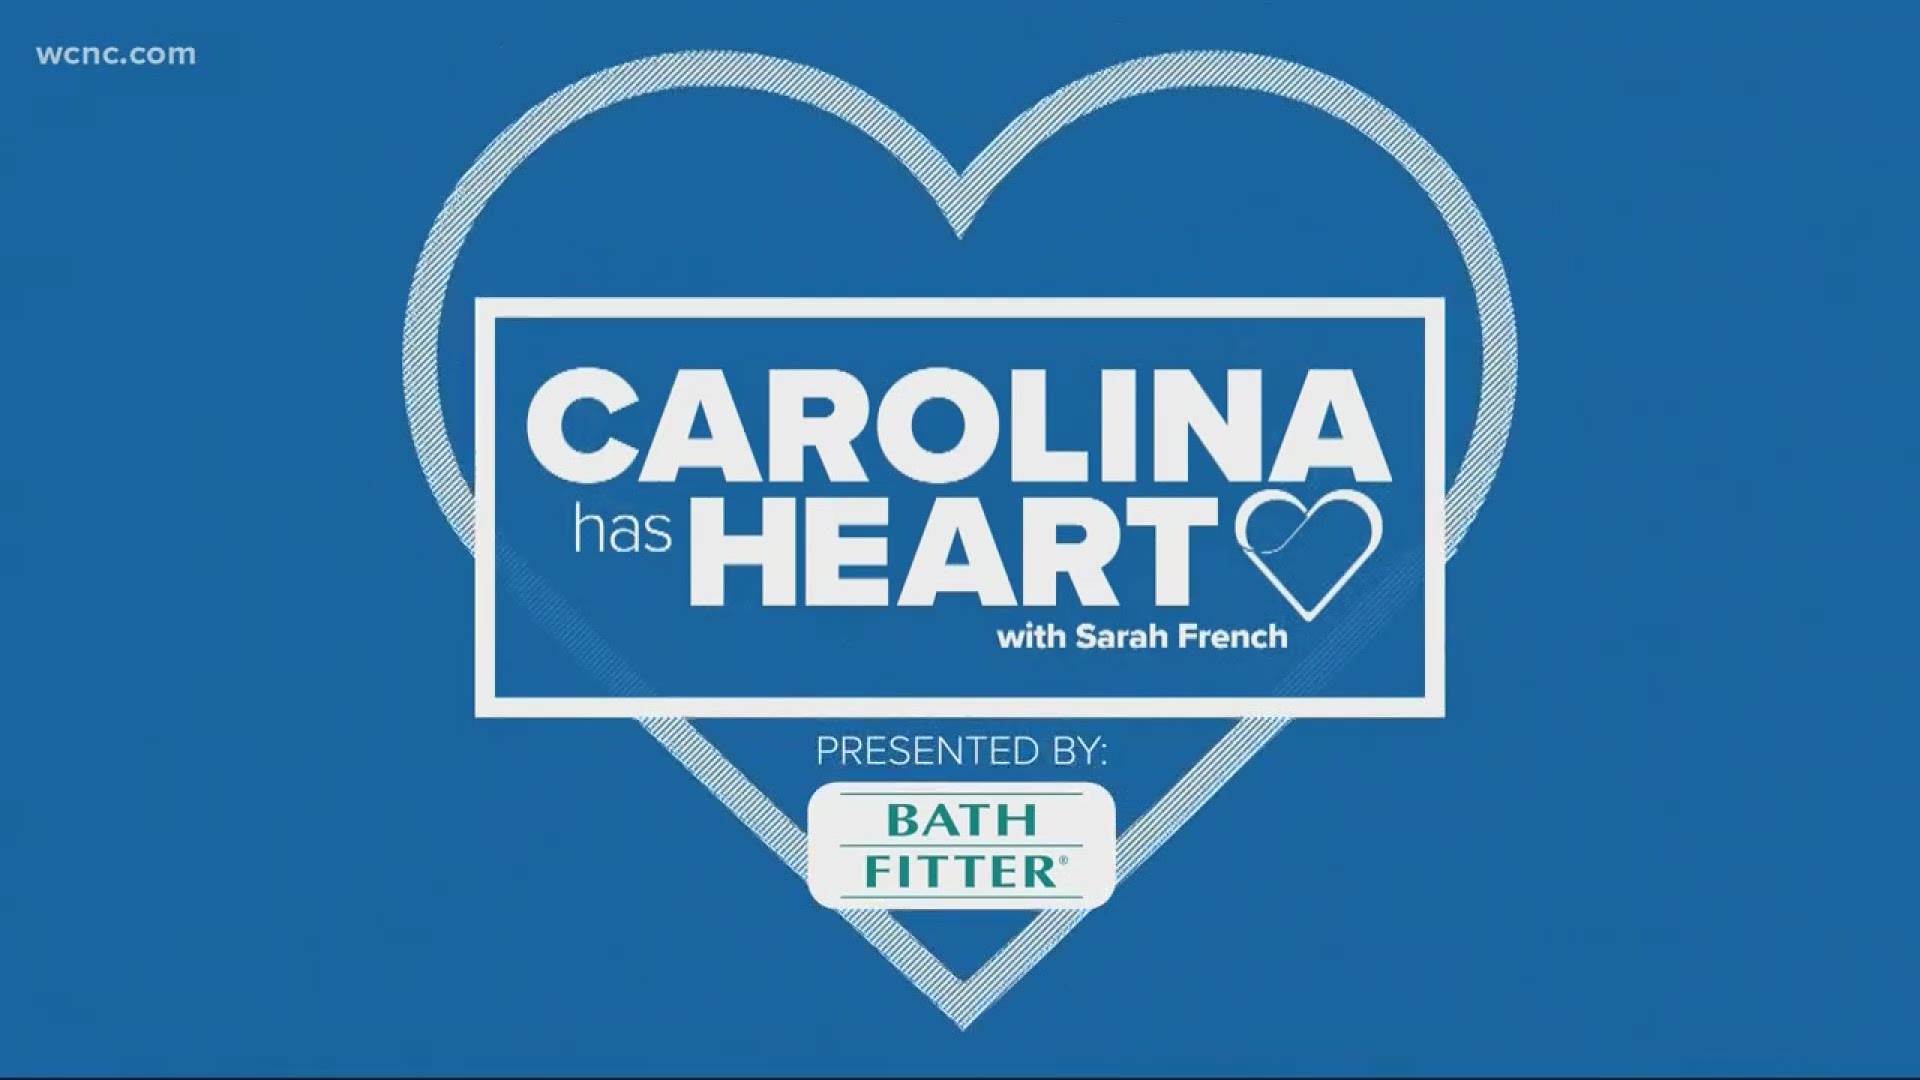 Carolina has heart: Elon Homes gives foster kids, young adults some stability